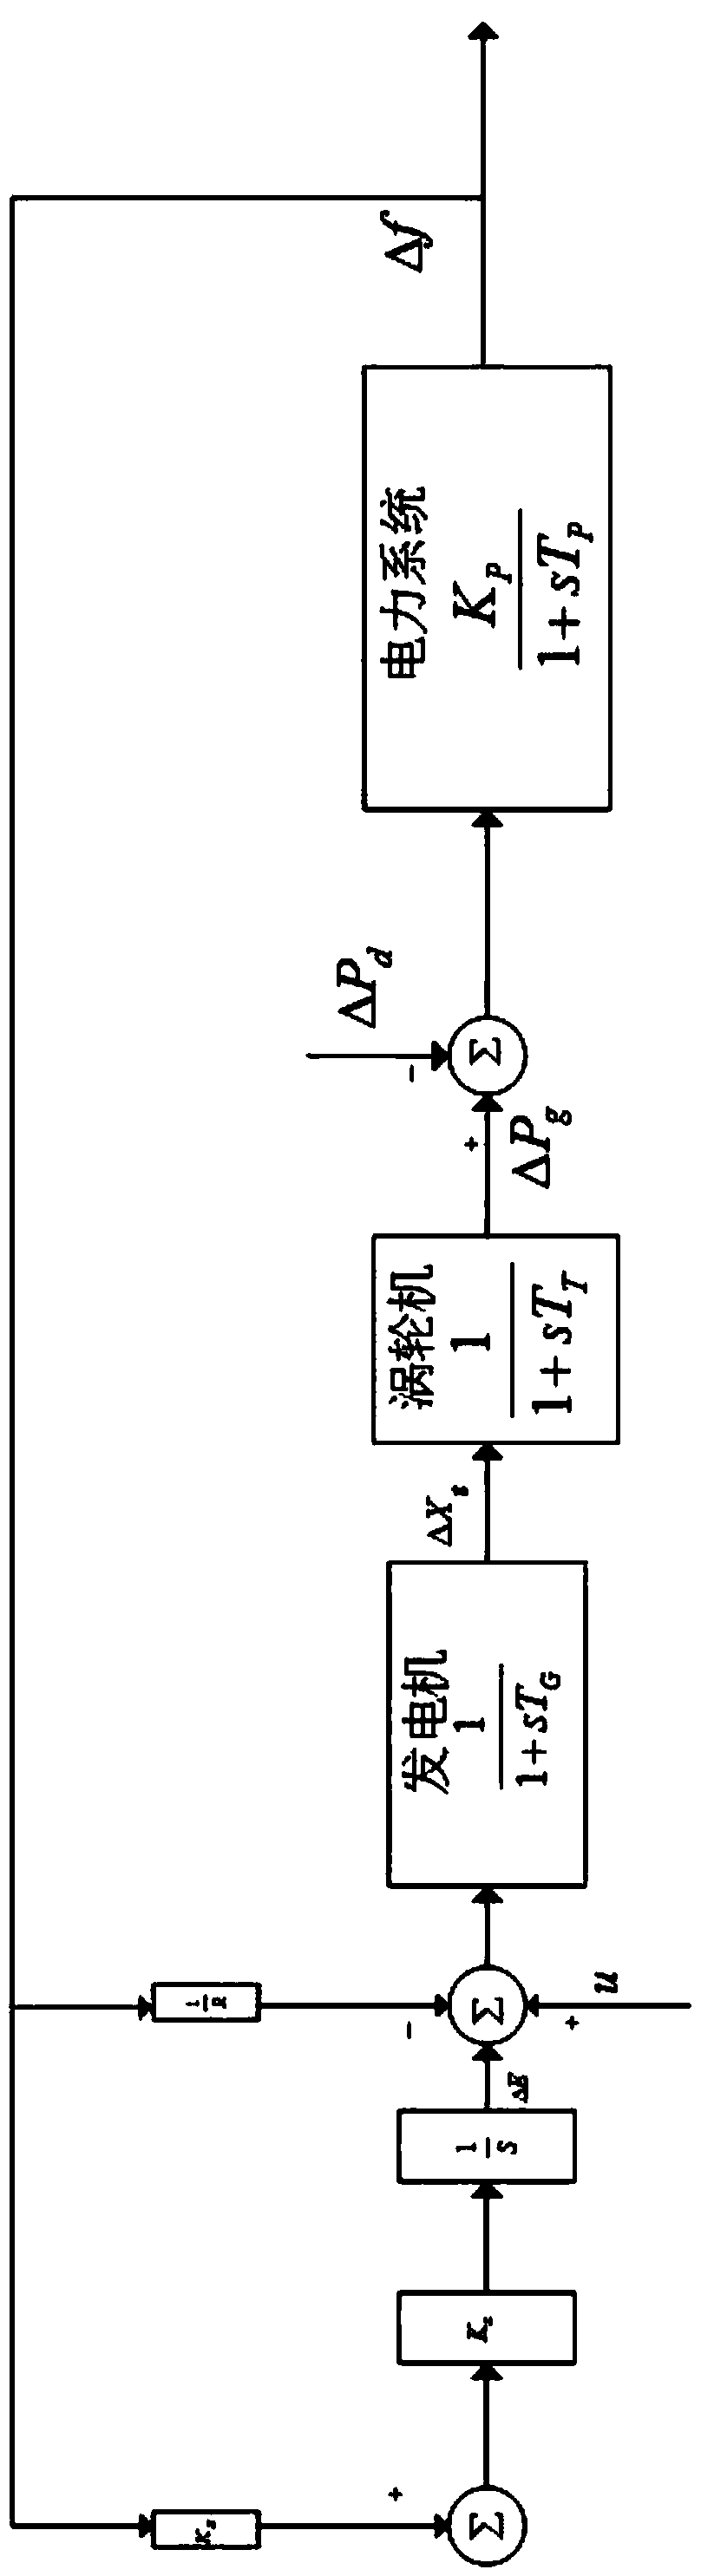 Method for improving power grid frequency stability based on sliding mode control